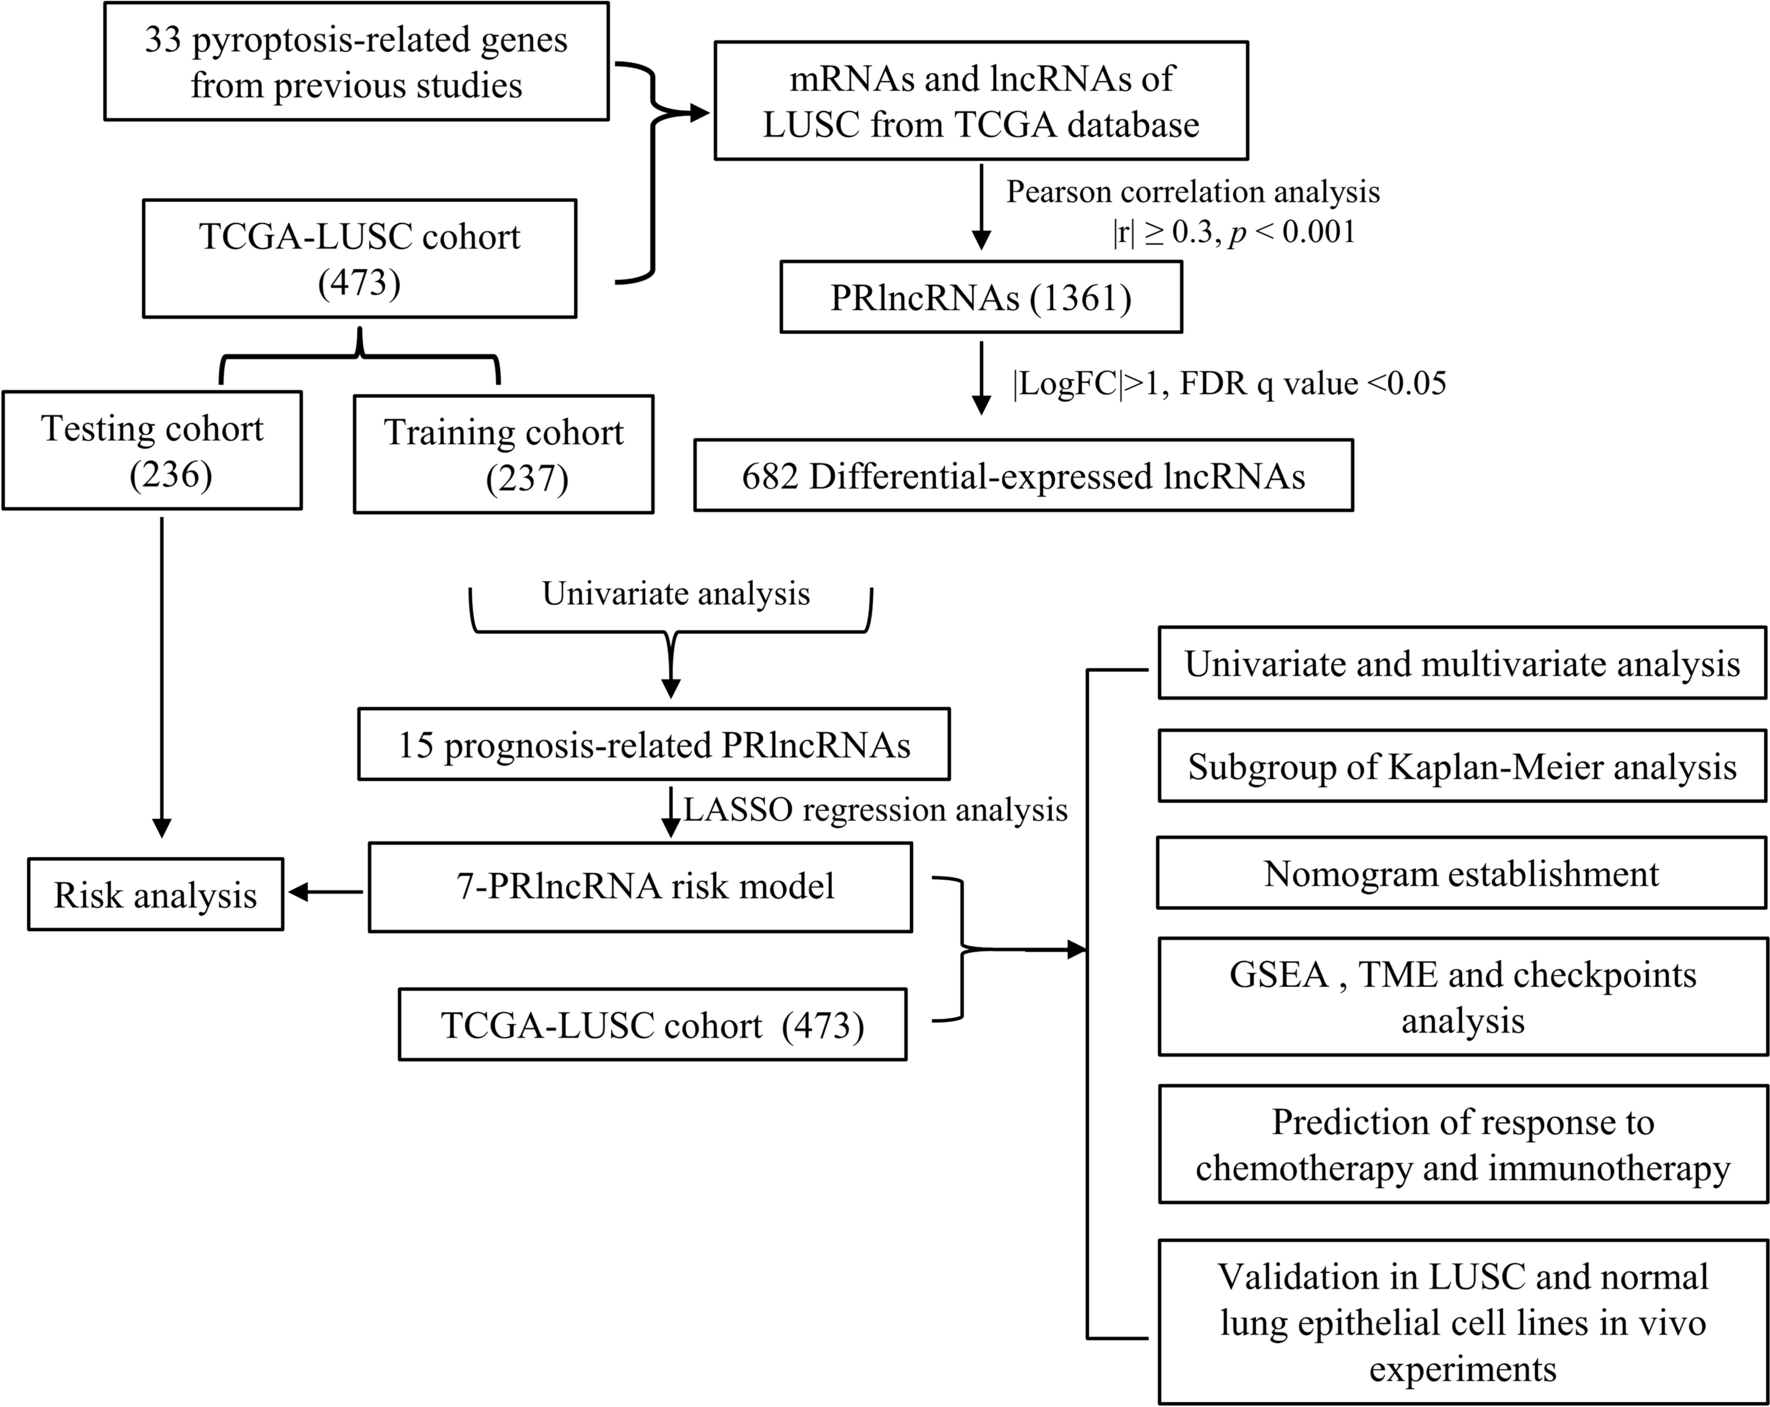 Pyroptosis-related long-noncoding RNA signature predicting survival and immunotherapy efficacy in patients with lung squamous cell carcinoma